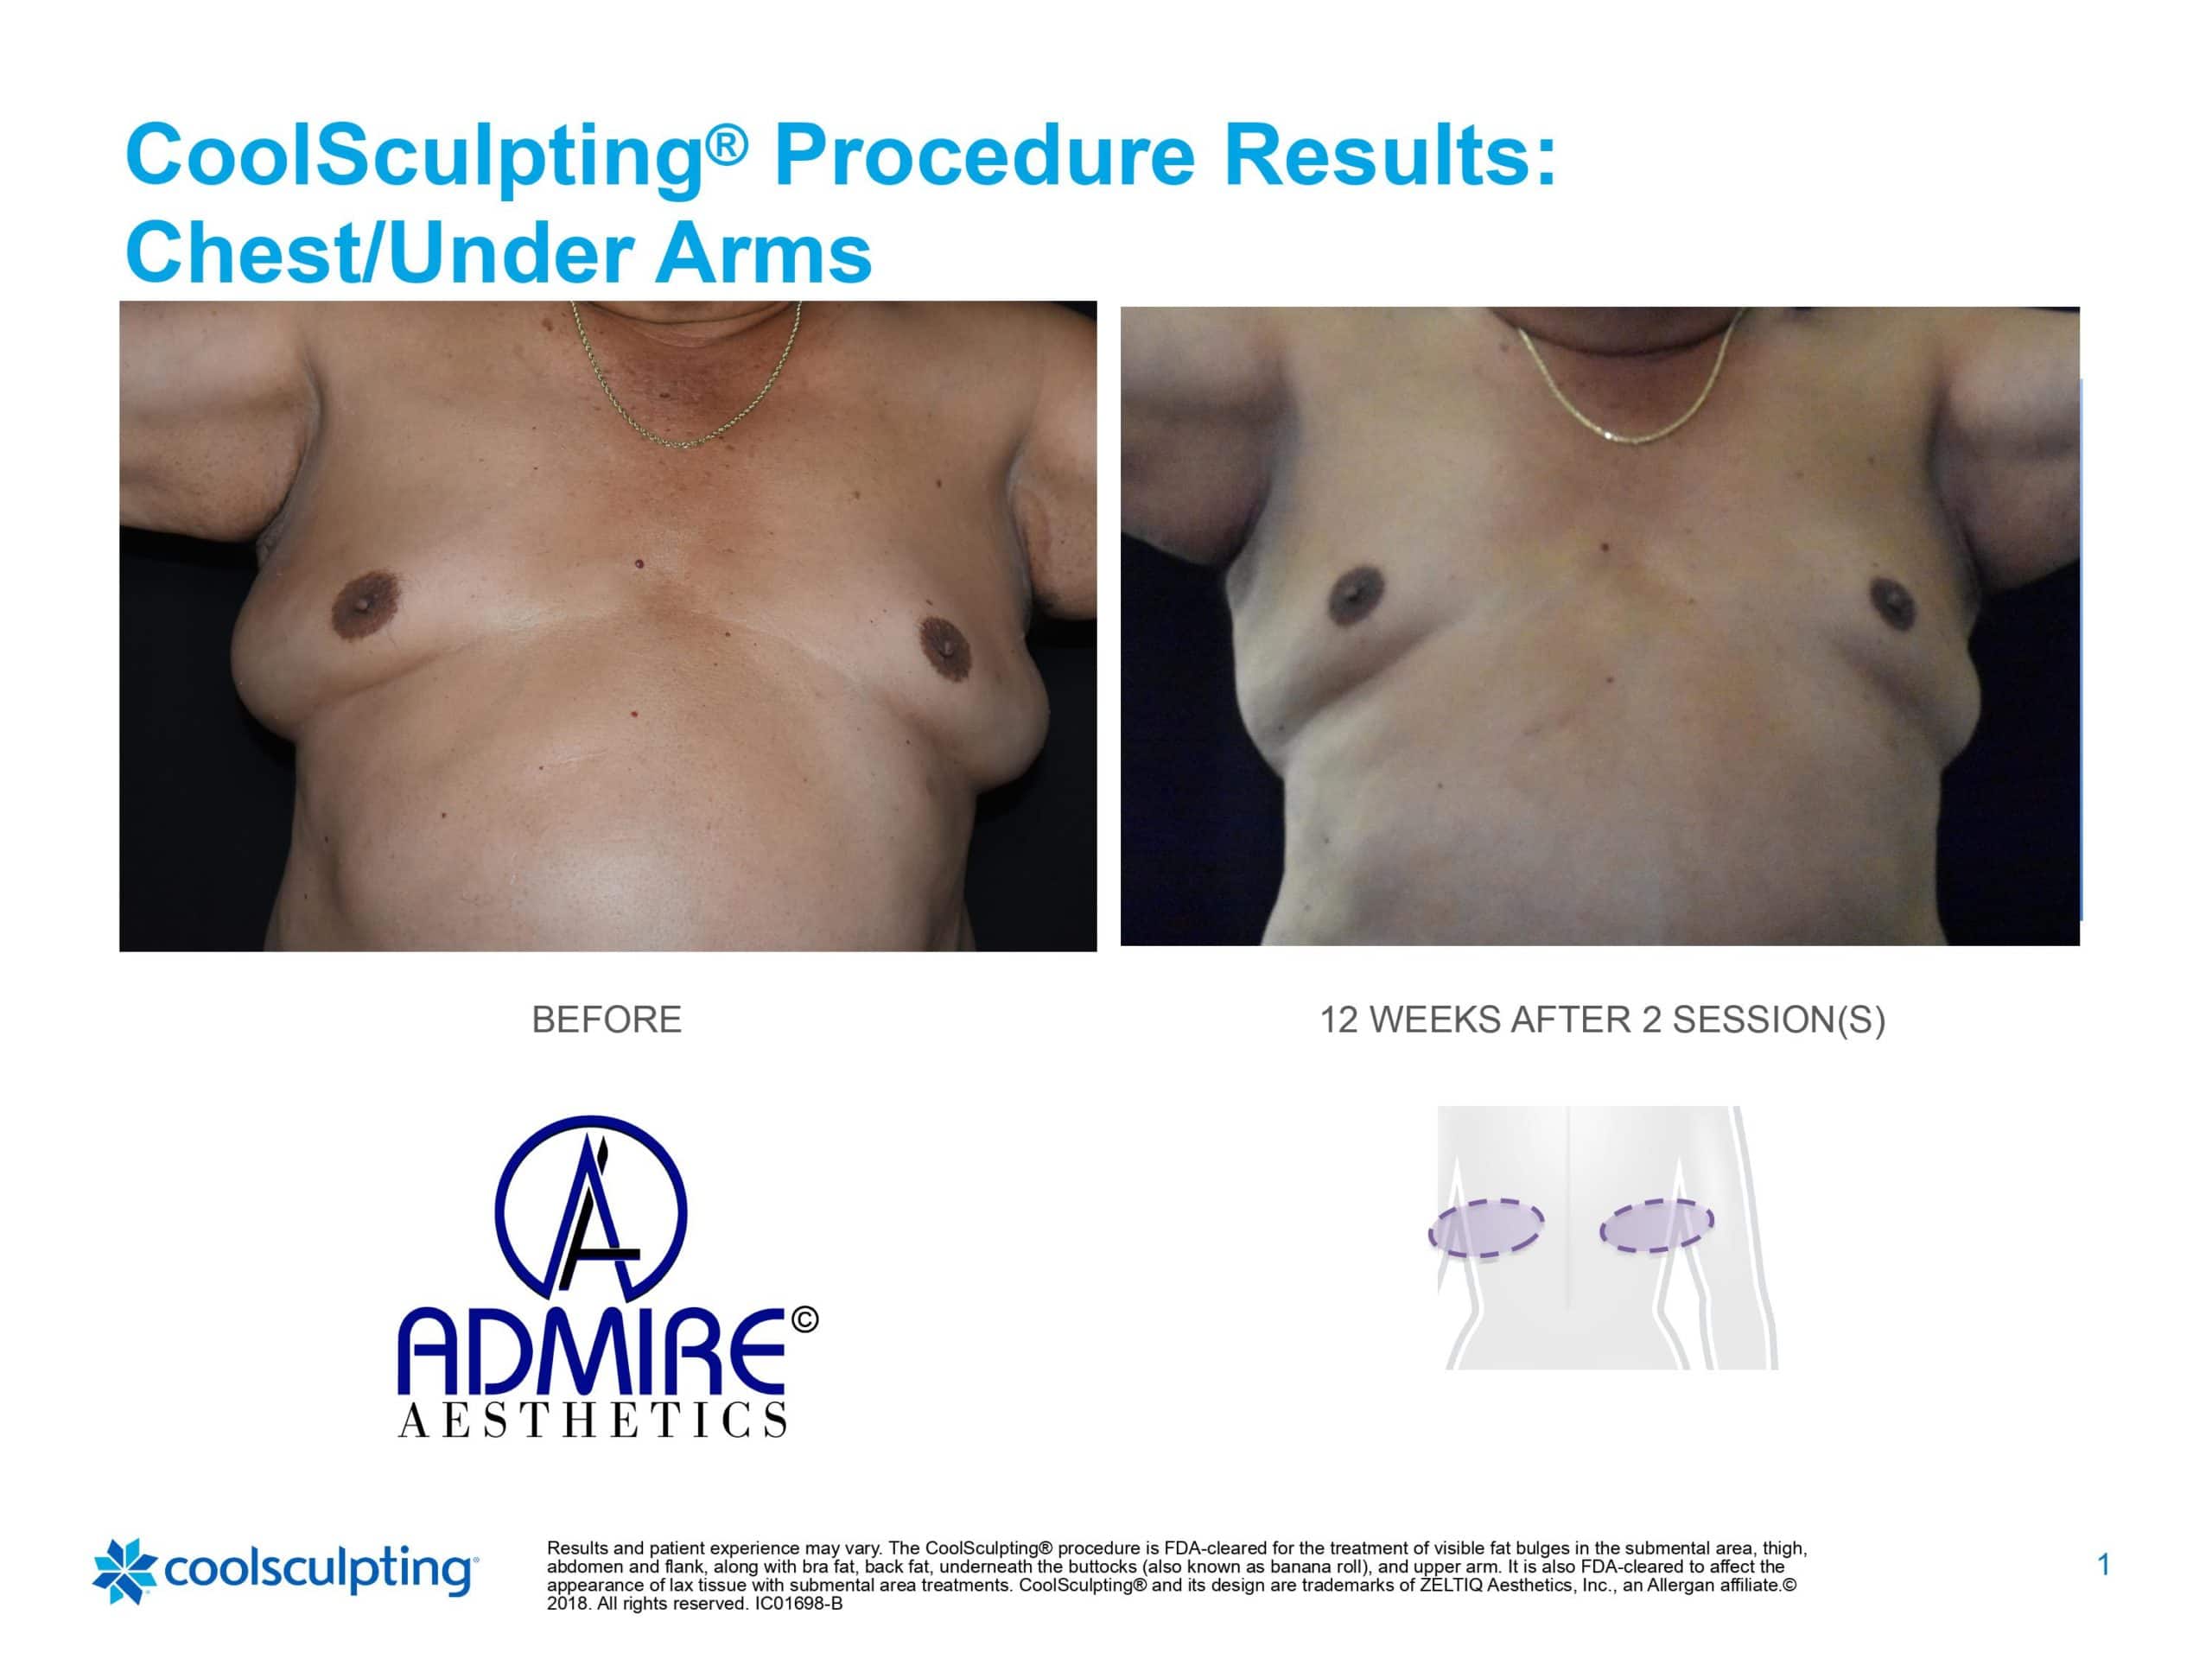 Mans underarm and chest fat before and after coolsculpting treatment at Admire Aesthetics.